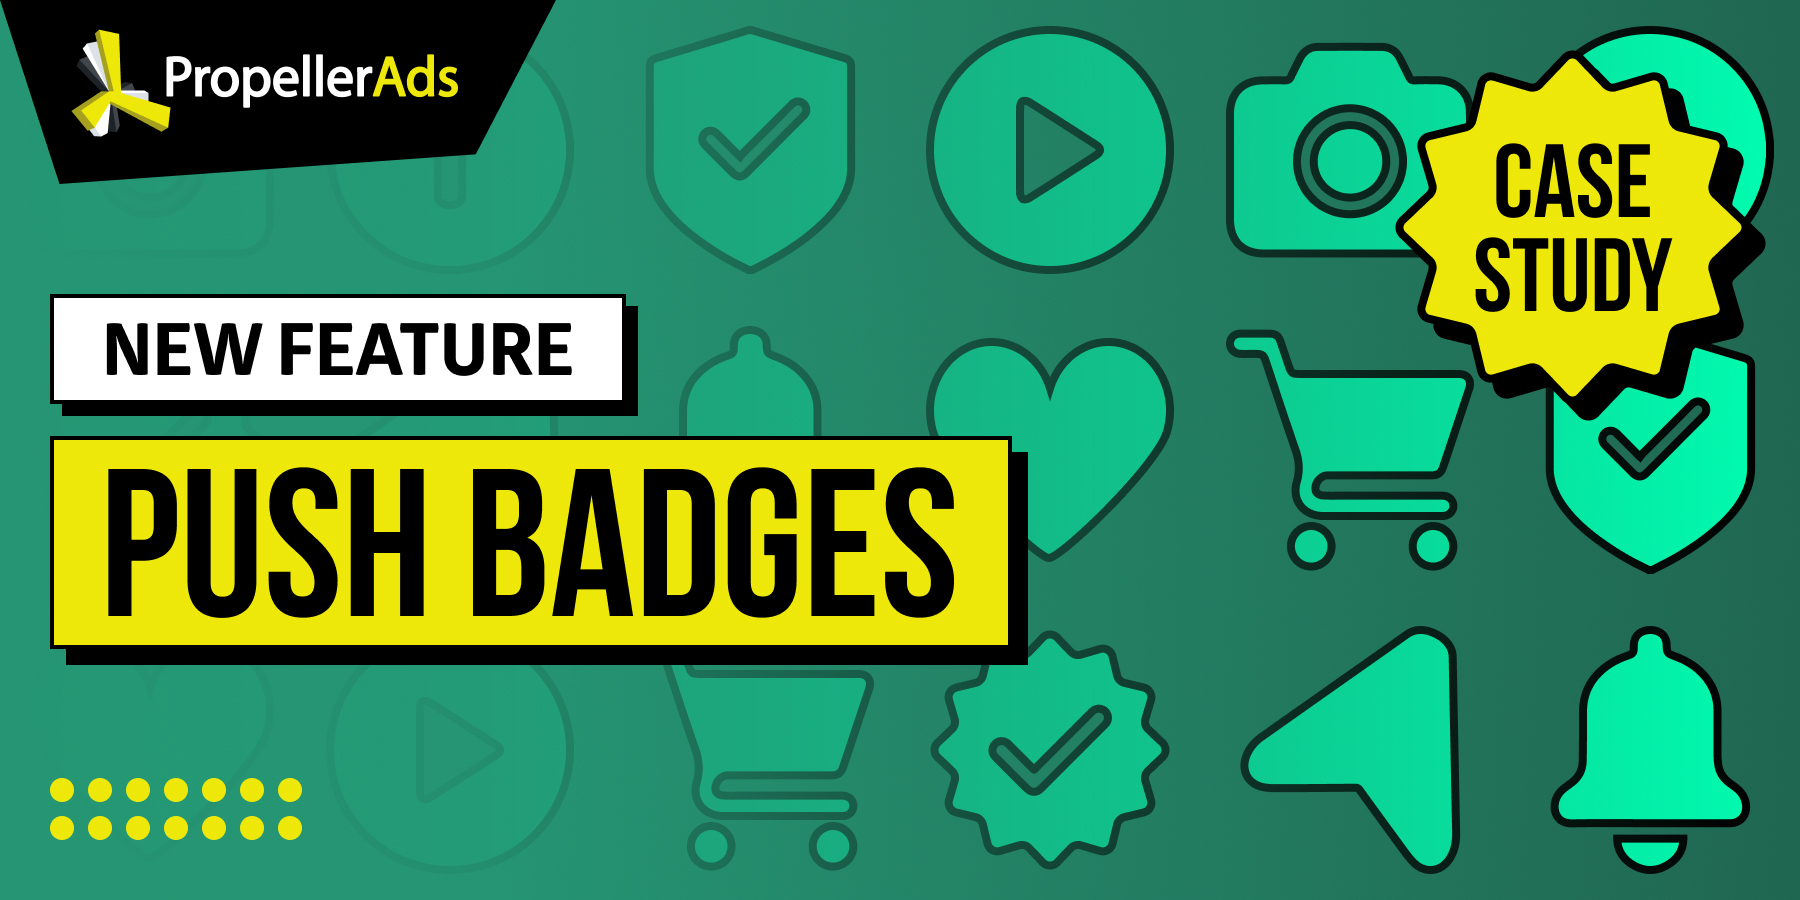 Push badges new feature